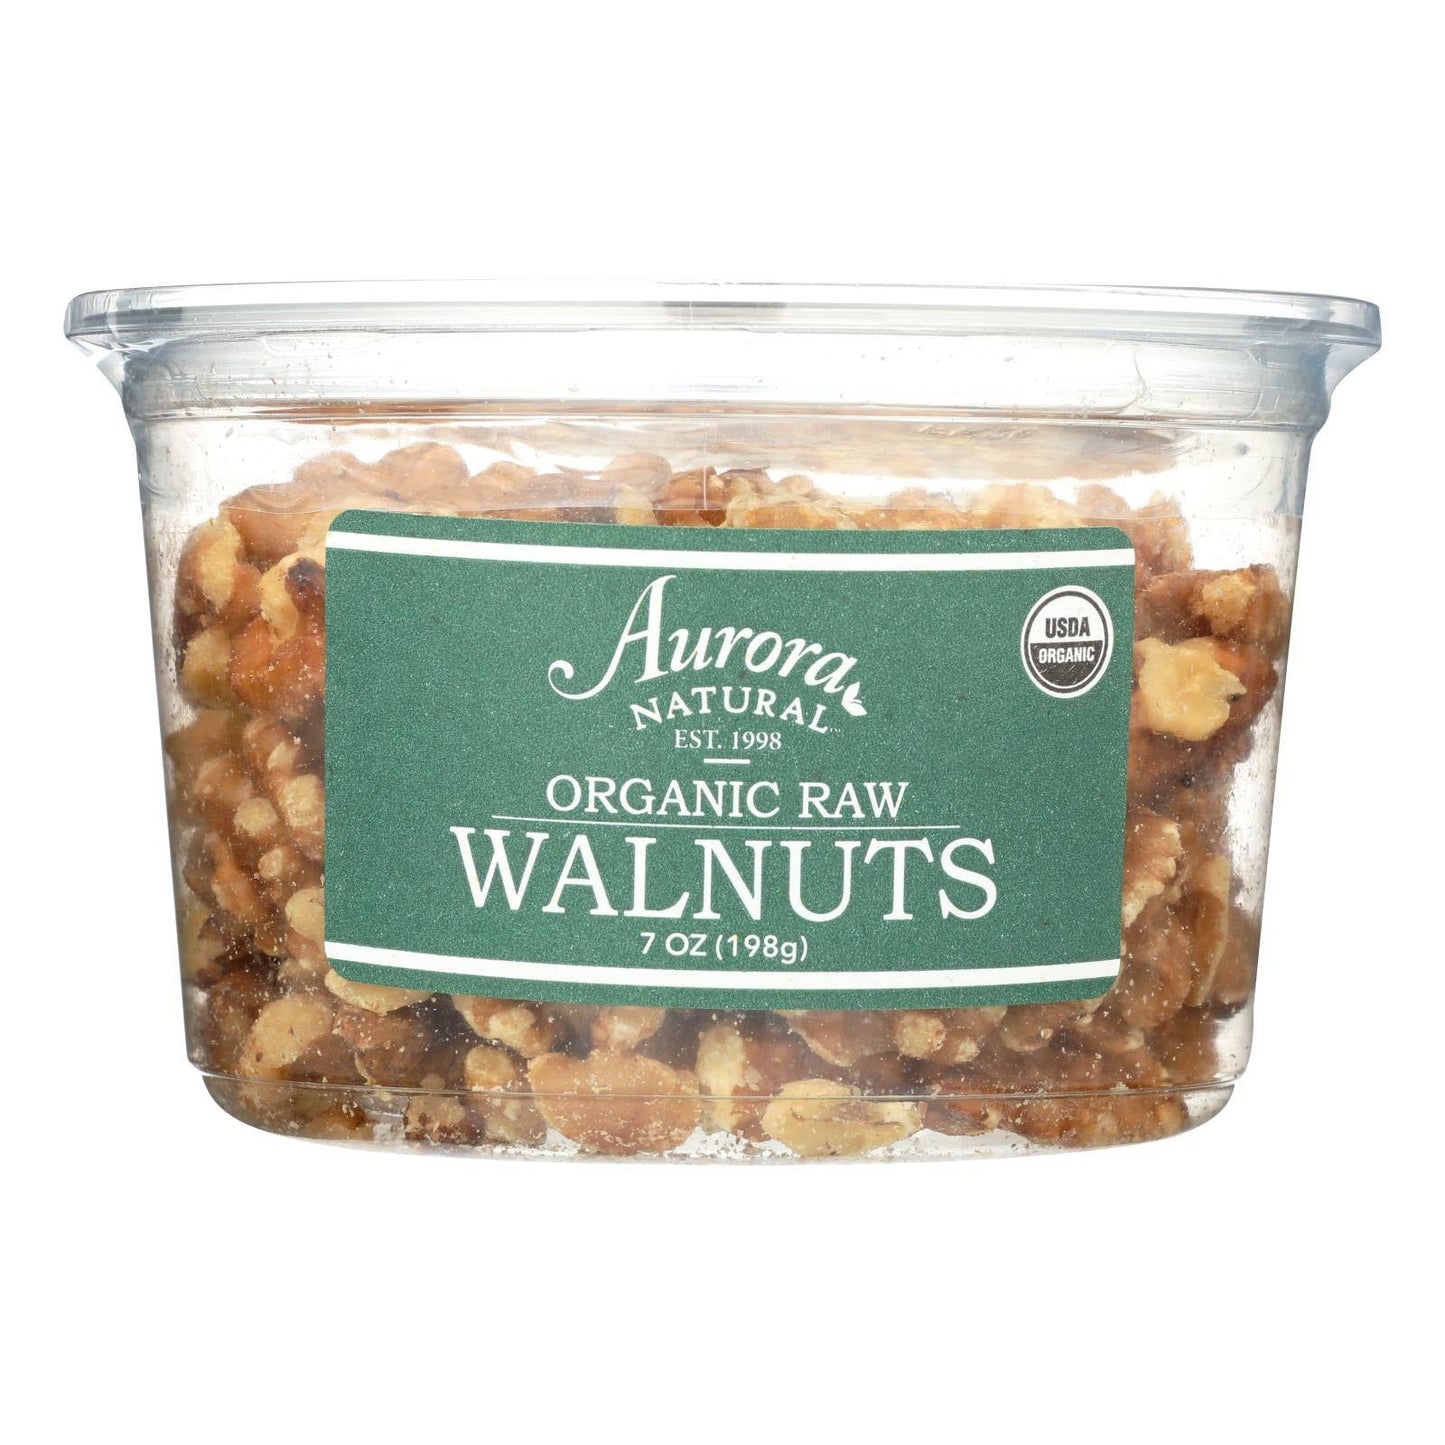 Aurora Natural Products - Organic Raw Walnuts - Case Of 12 - 7 Oz. | OnlyNaturals.us